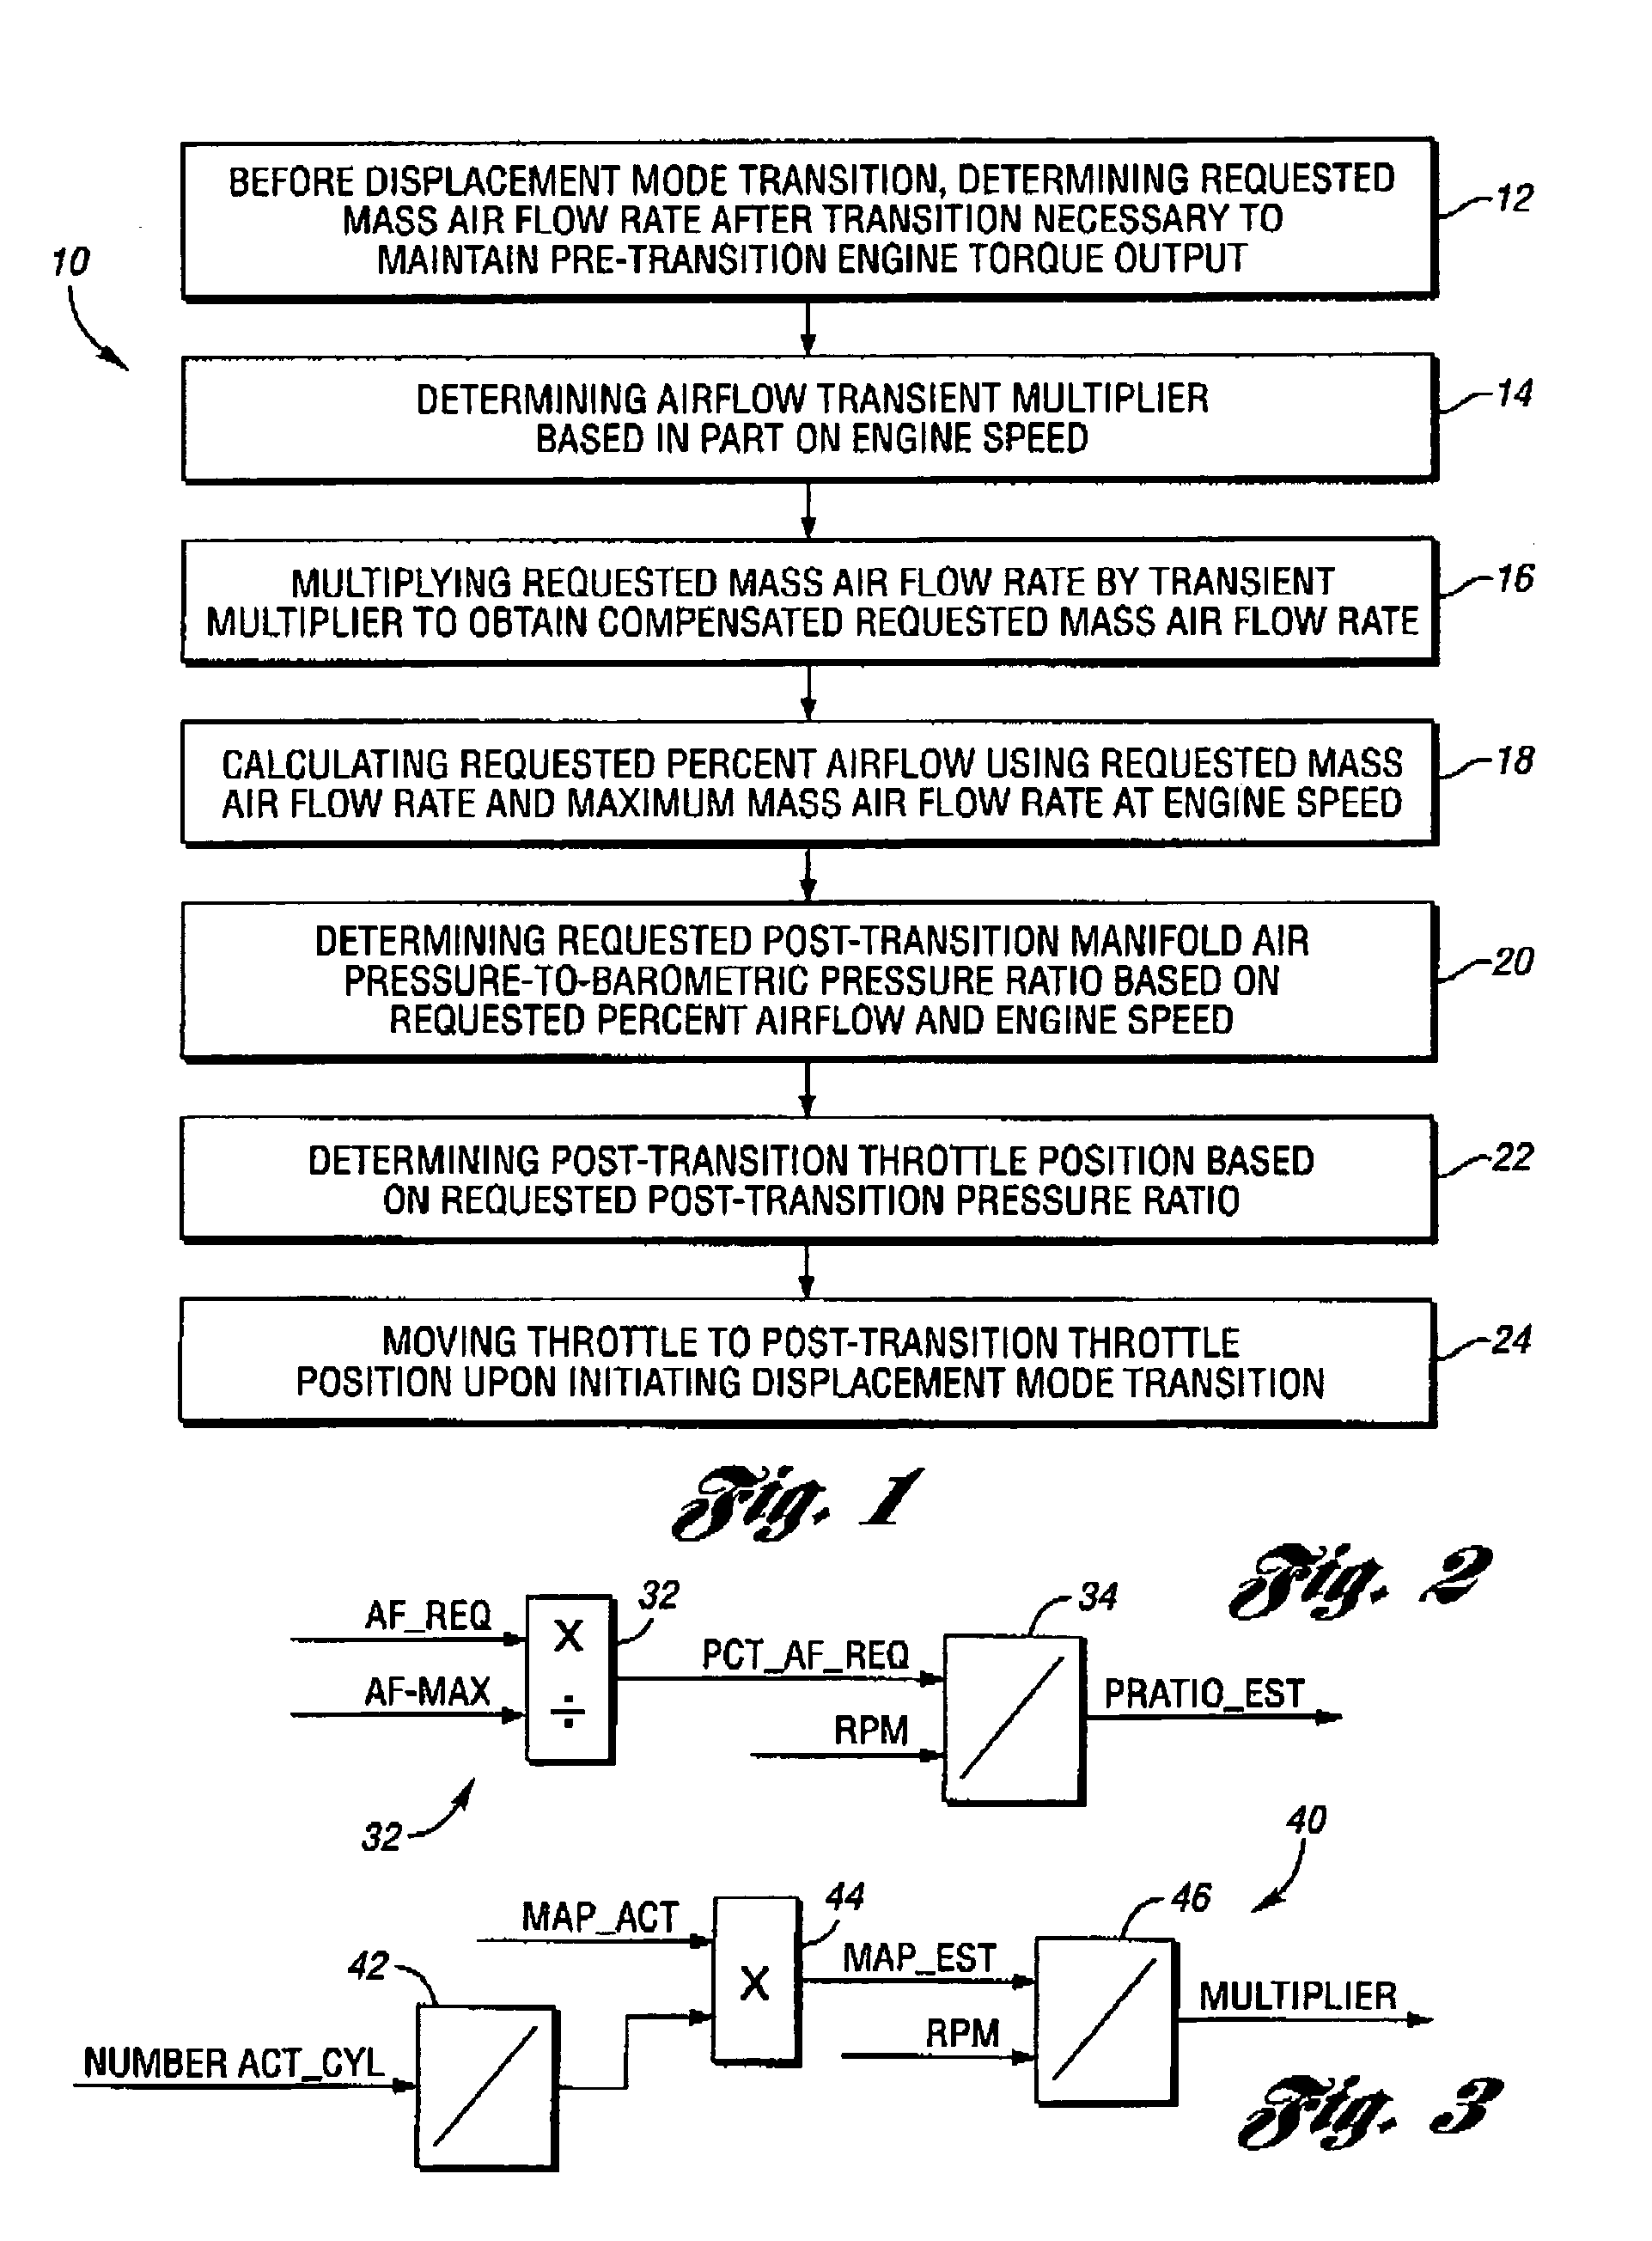 Airflow control for multiple-displacement engine during engine displacement transitions